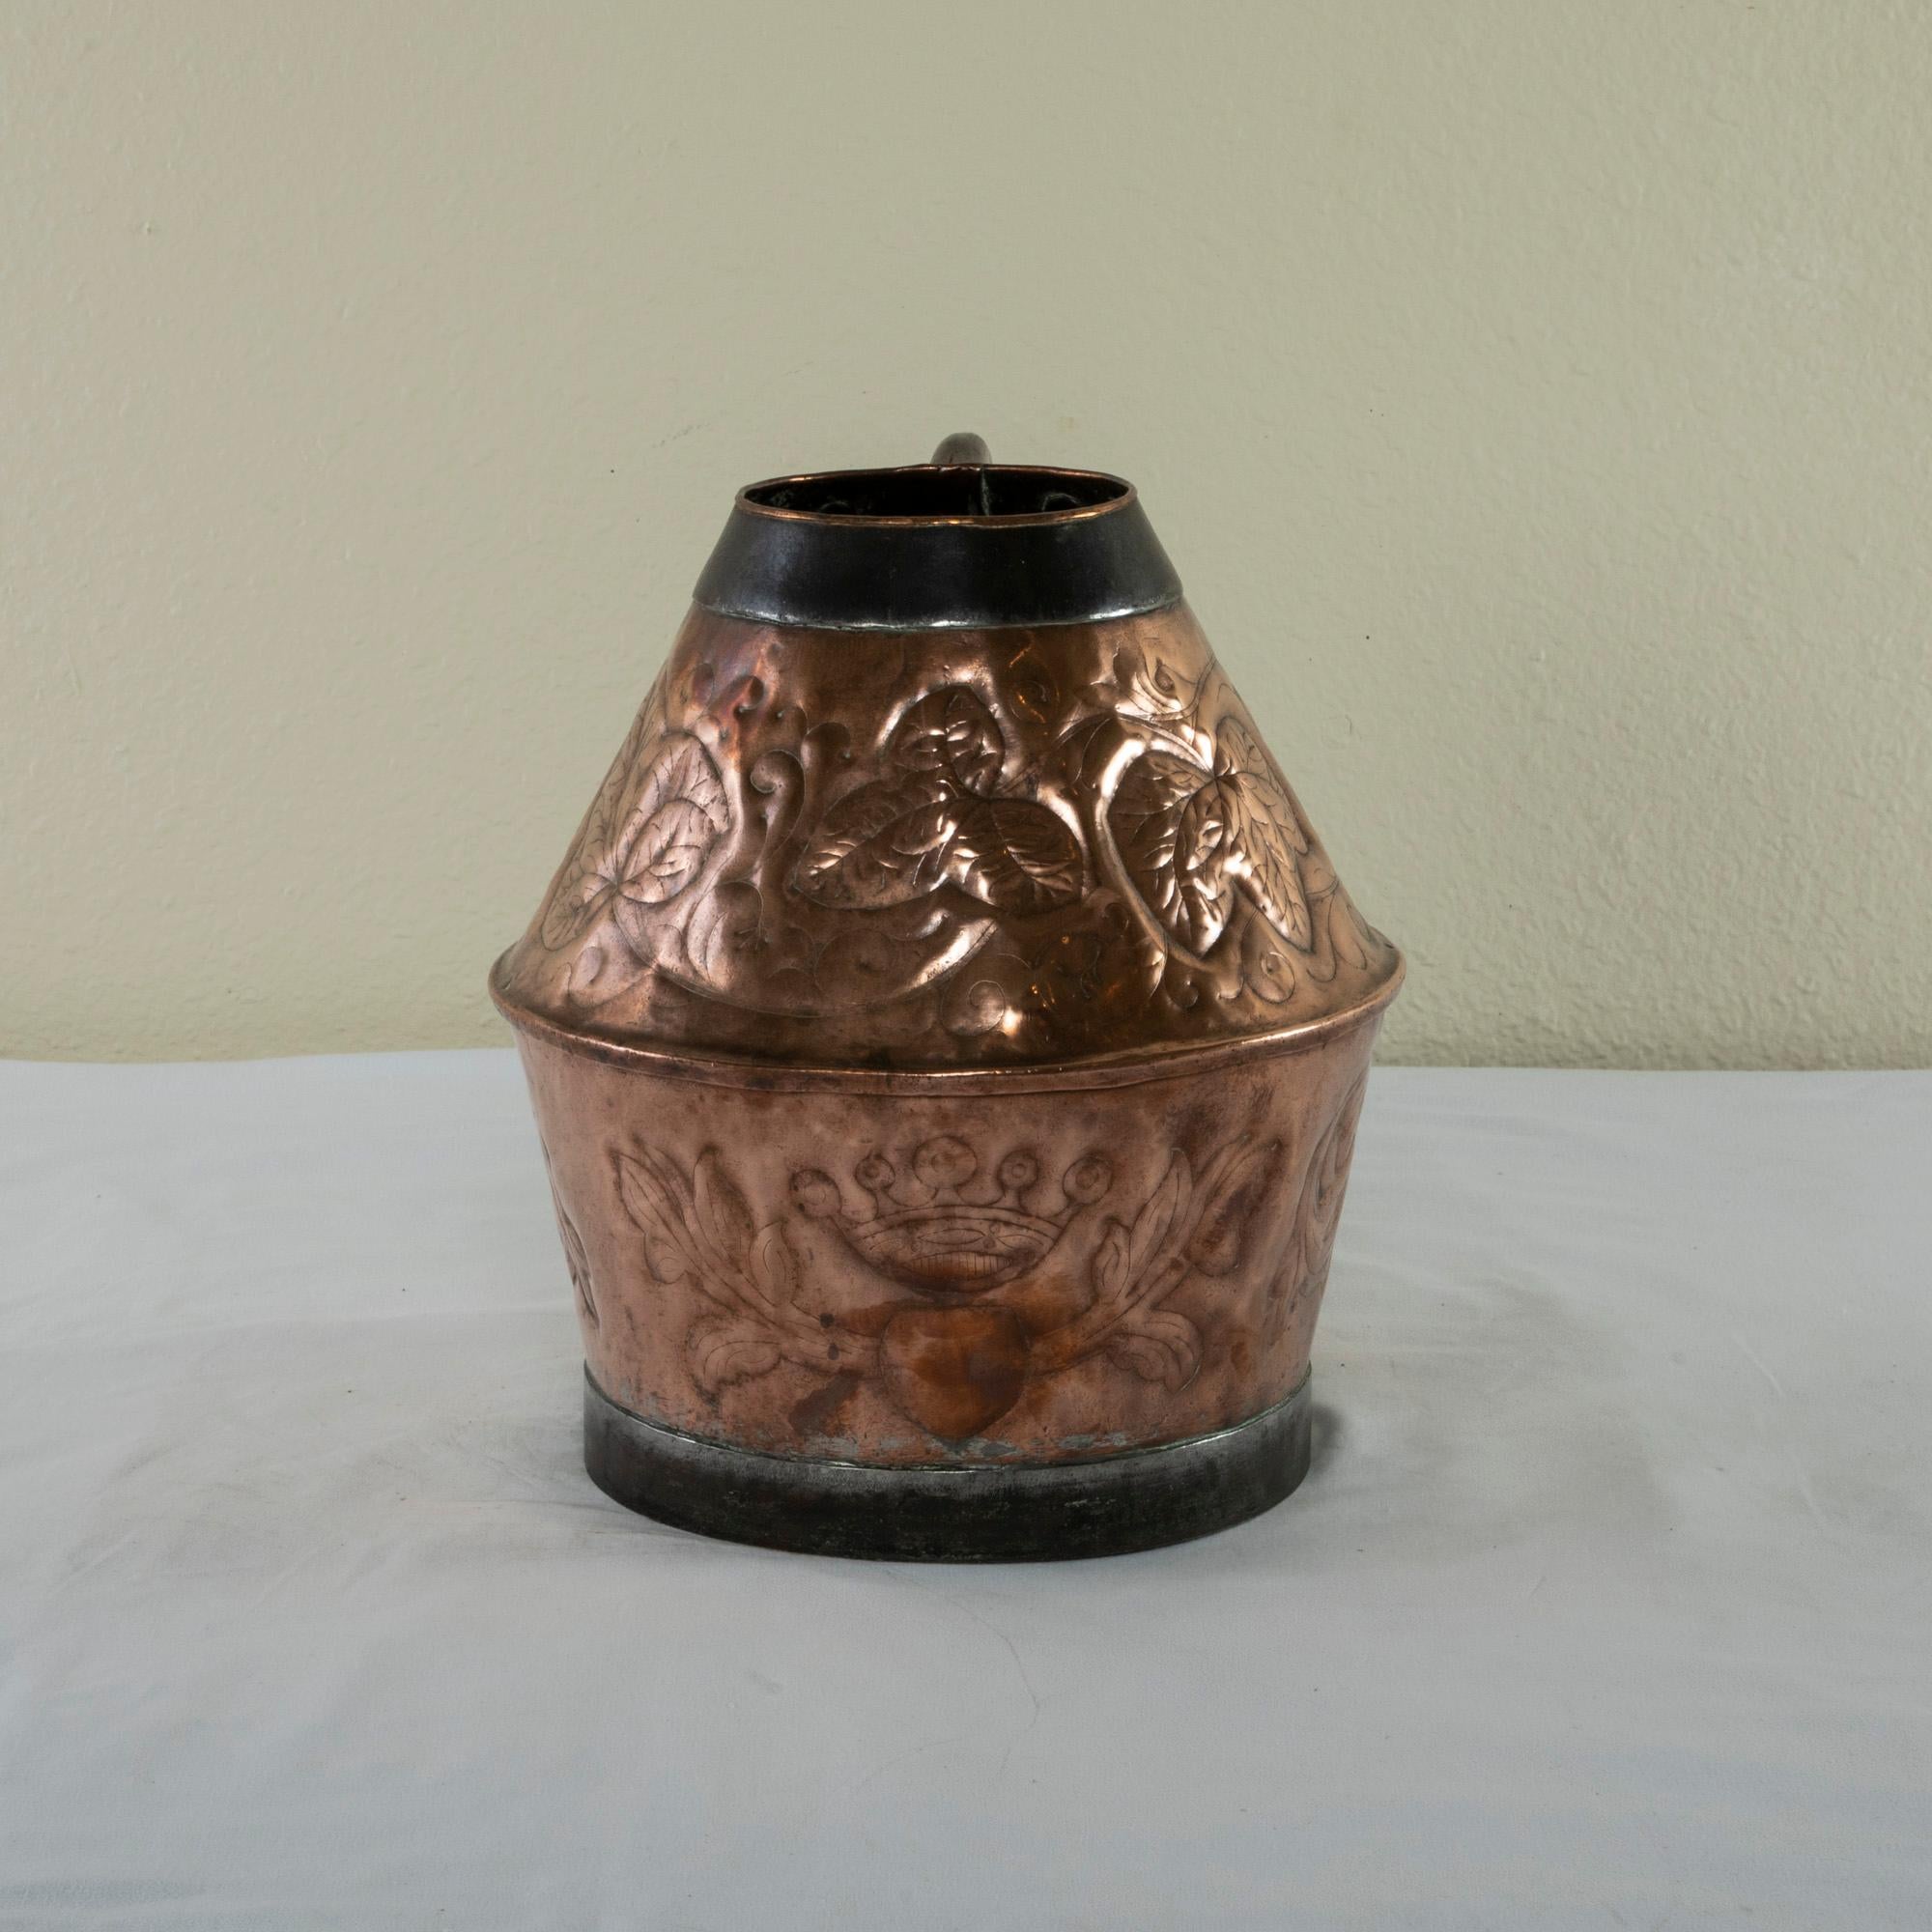 Originally used in a chateau, this large scale late 19th century French copper repousse pitcher features three shields on it lower half, each flanked by scrolling leaves. One of the shields depicts a rooster and another has a crown above it. The